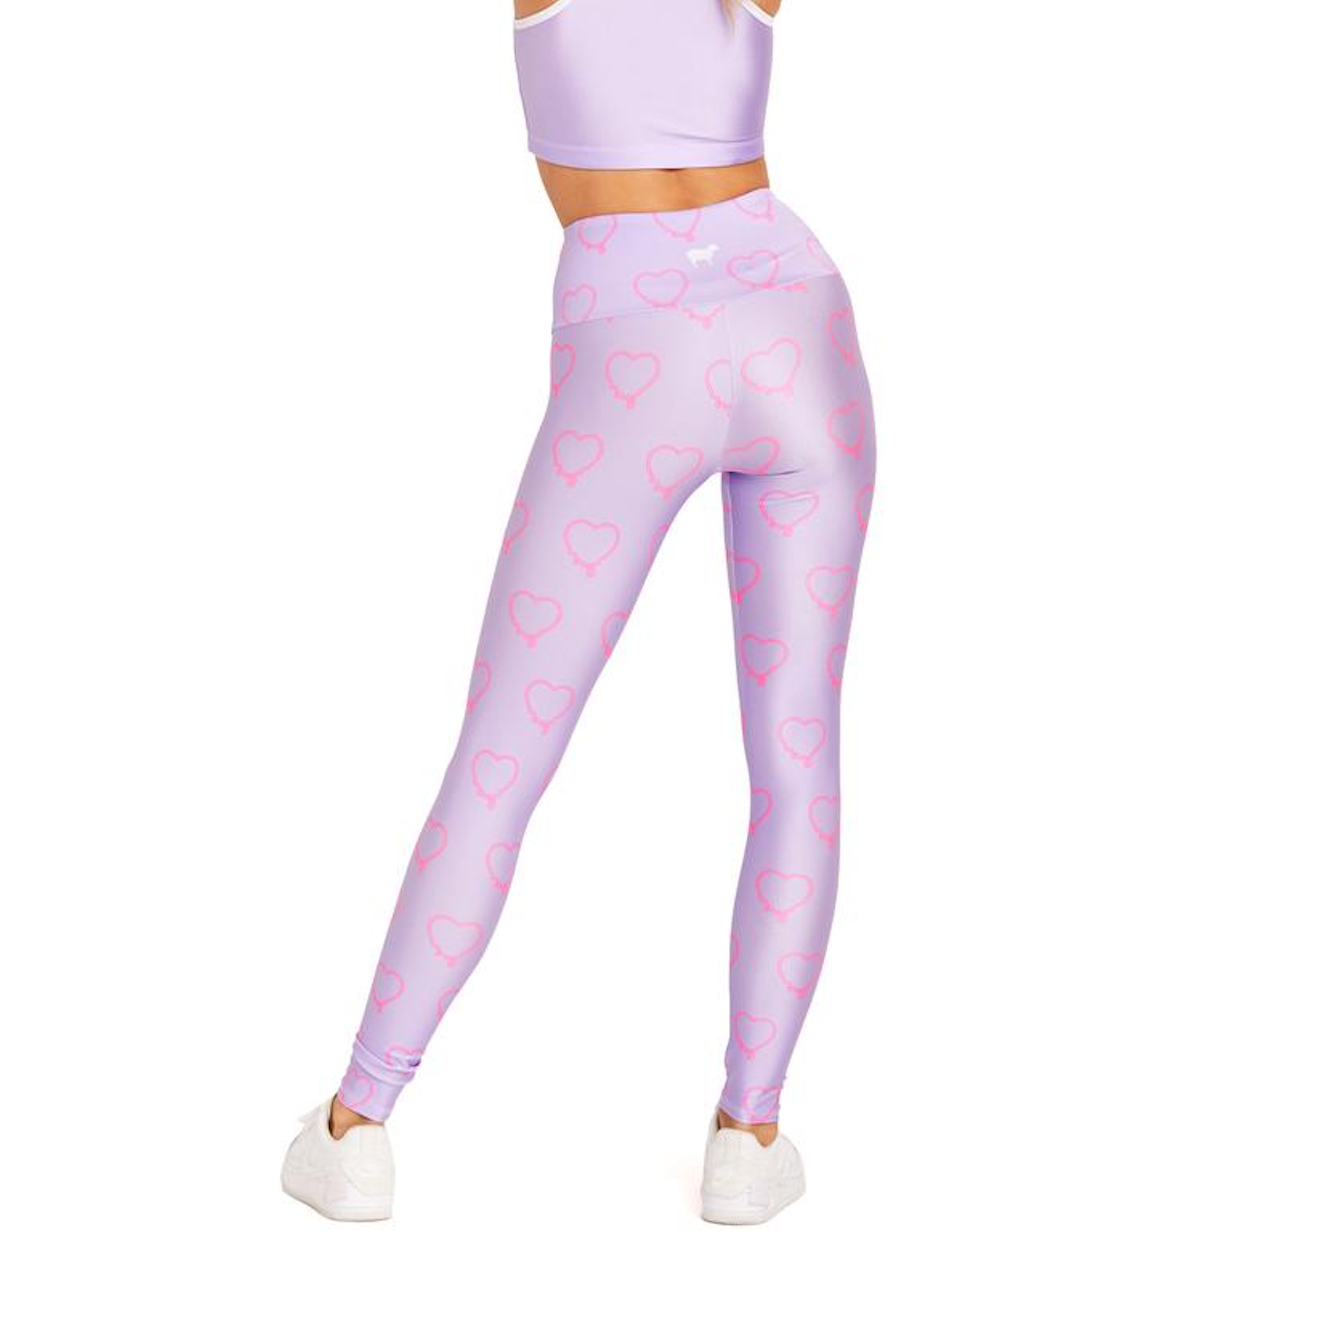 Gold sheep XS candy hearts pink leggings - Athletic apparel